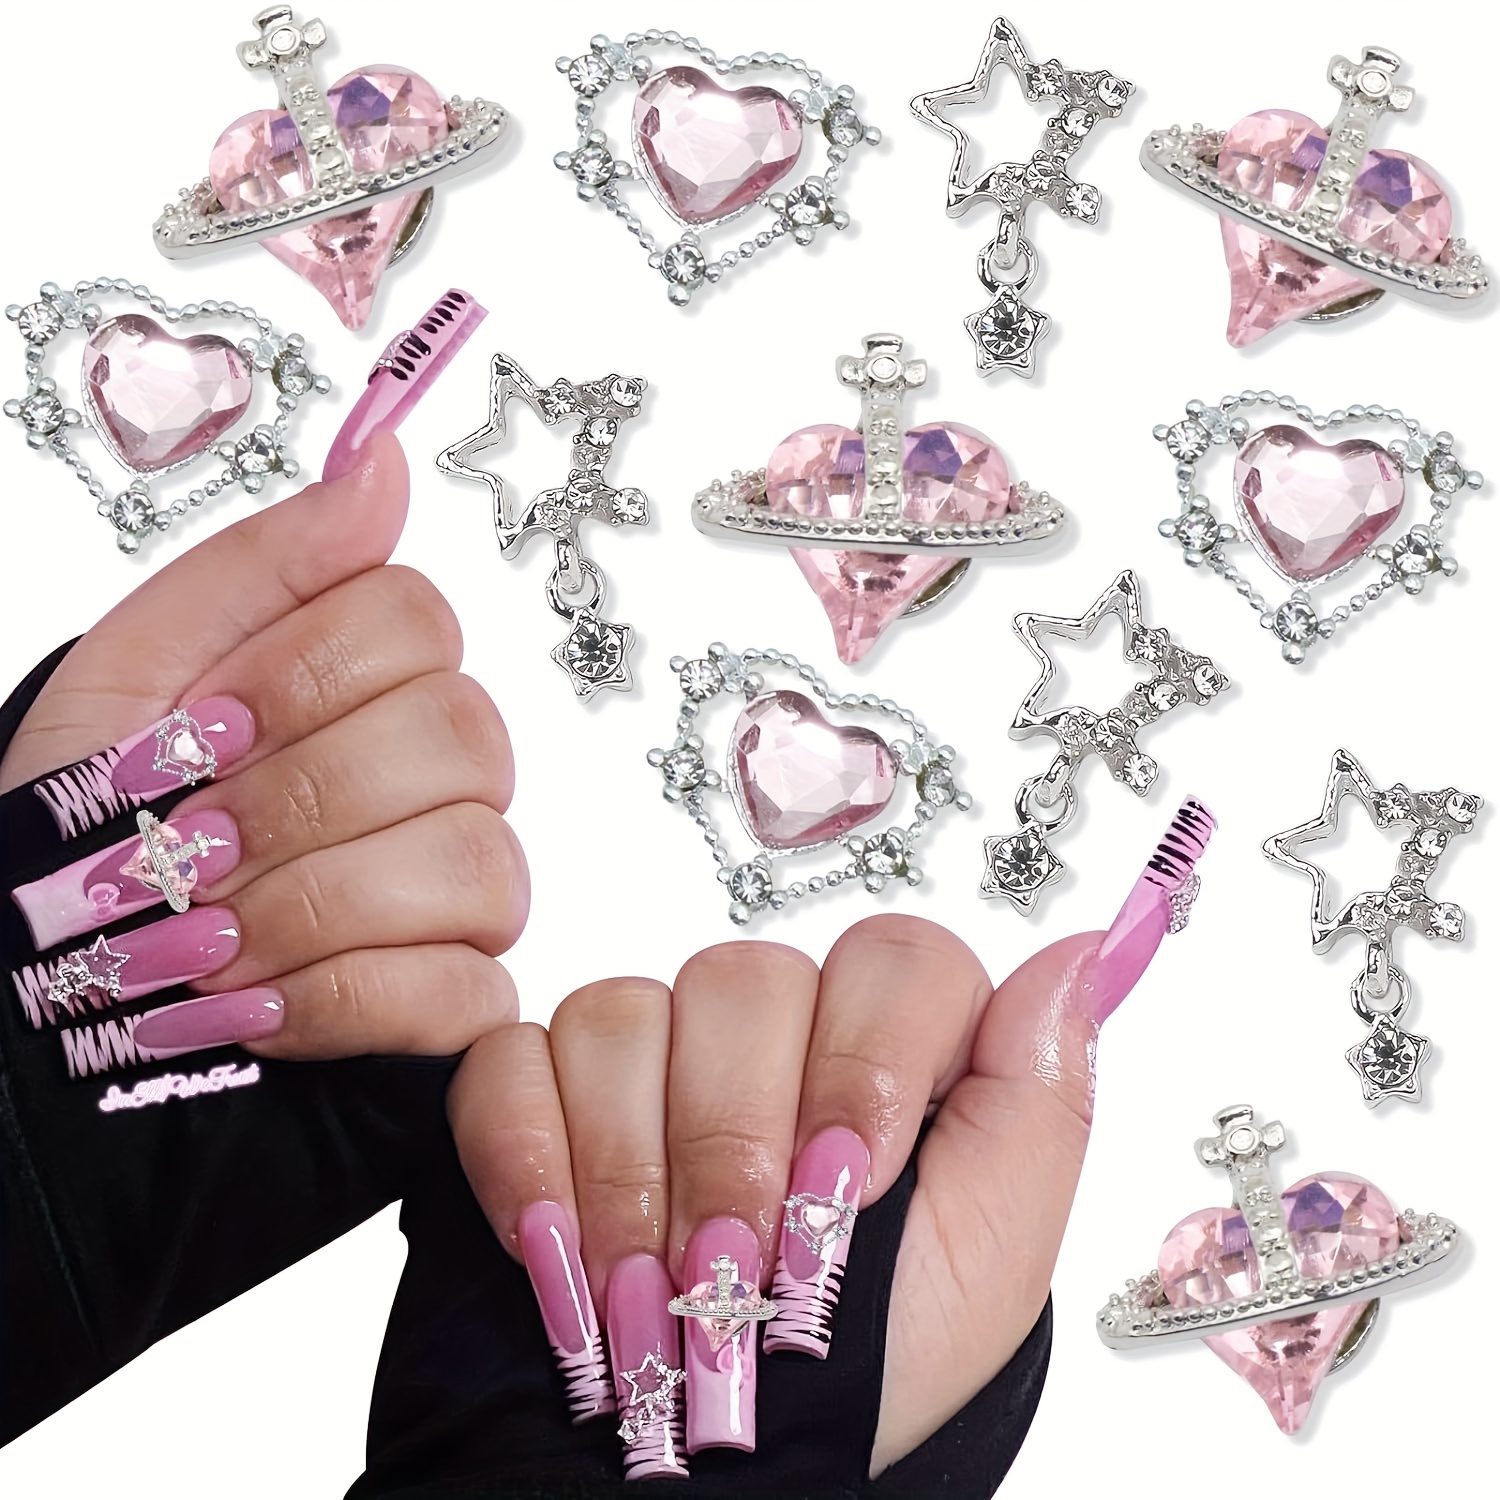 

60pcs Nail Art Charms Crystal Heart Nail Charms Pink Shiny Planet Charms 3d Alloy Star Nail Charm Shiny Flatback Gems Rhinestones For Nail Art And Diy Crafts Jewelry Decoration